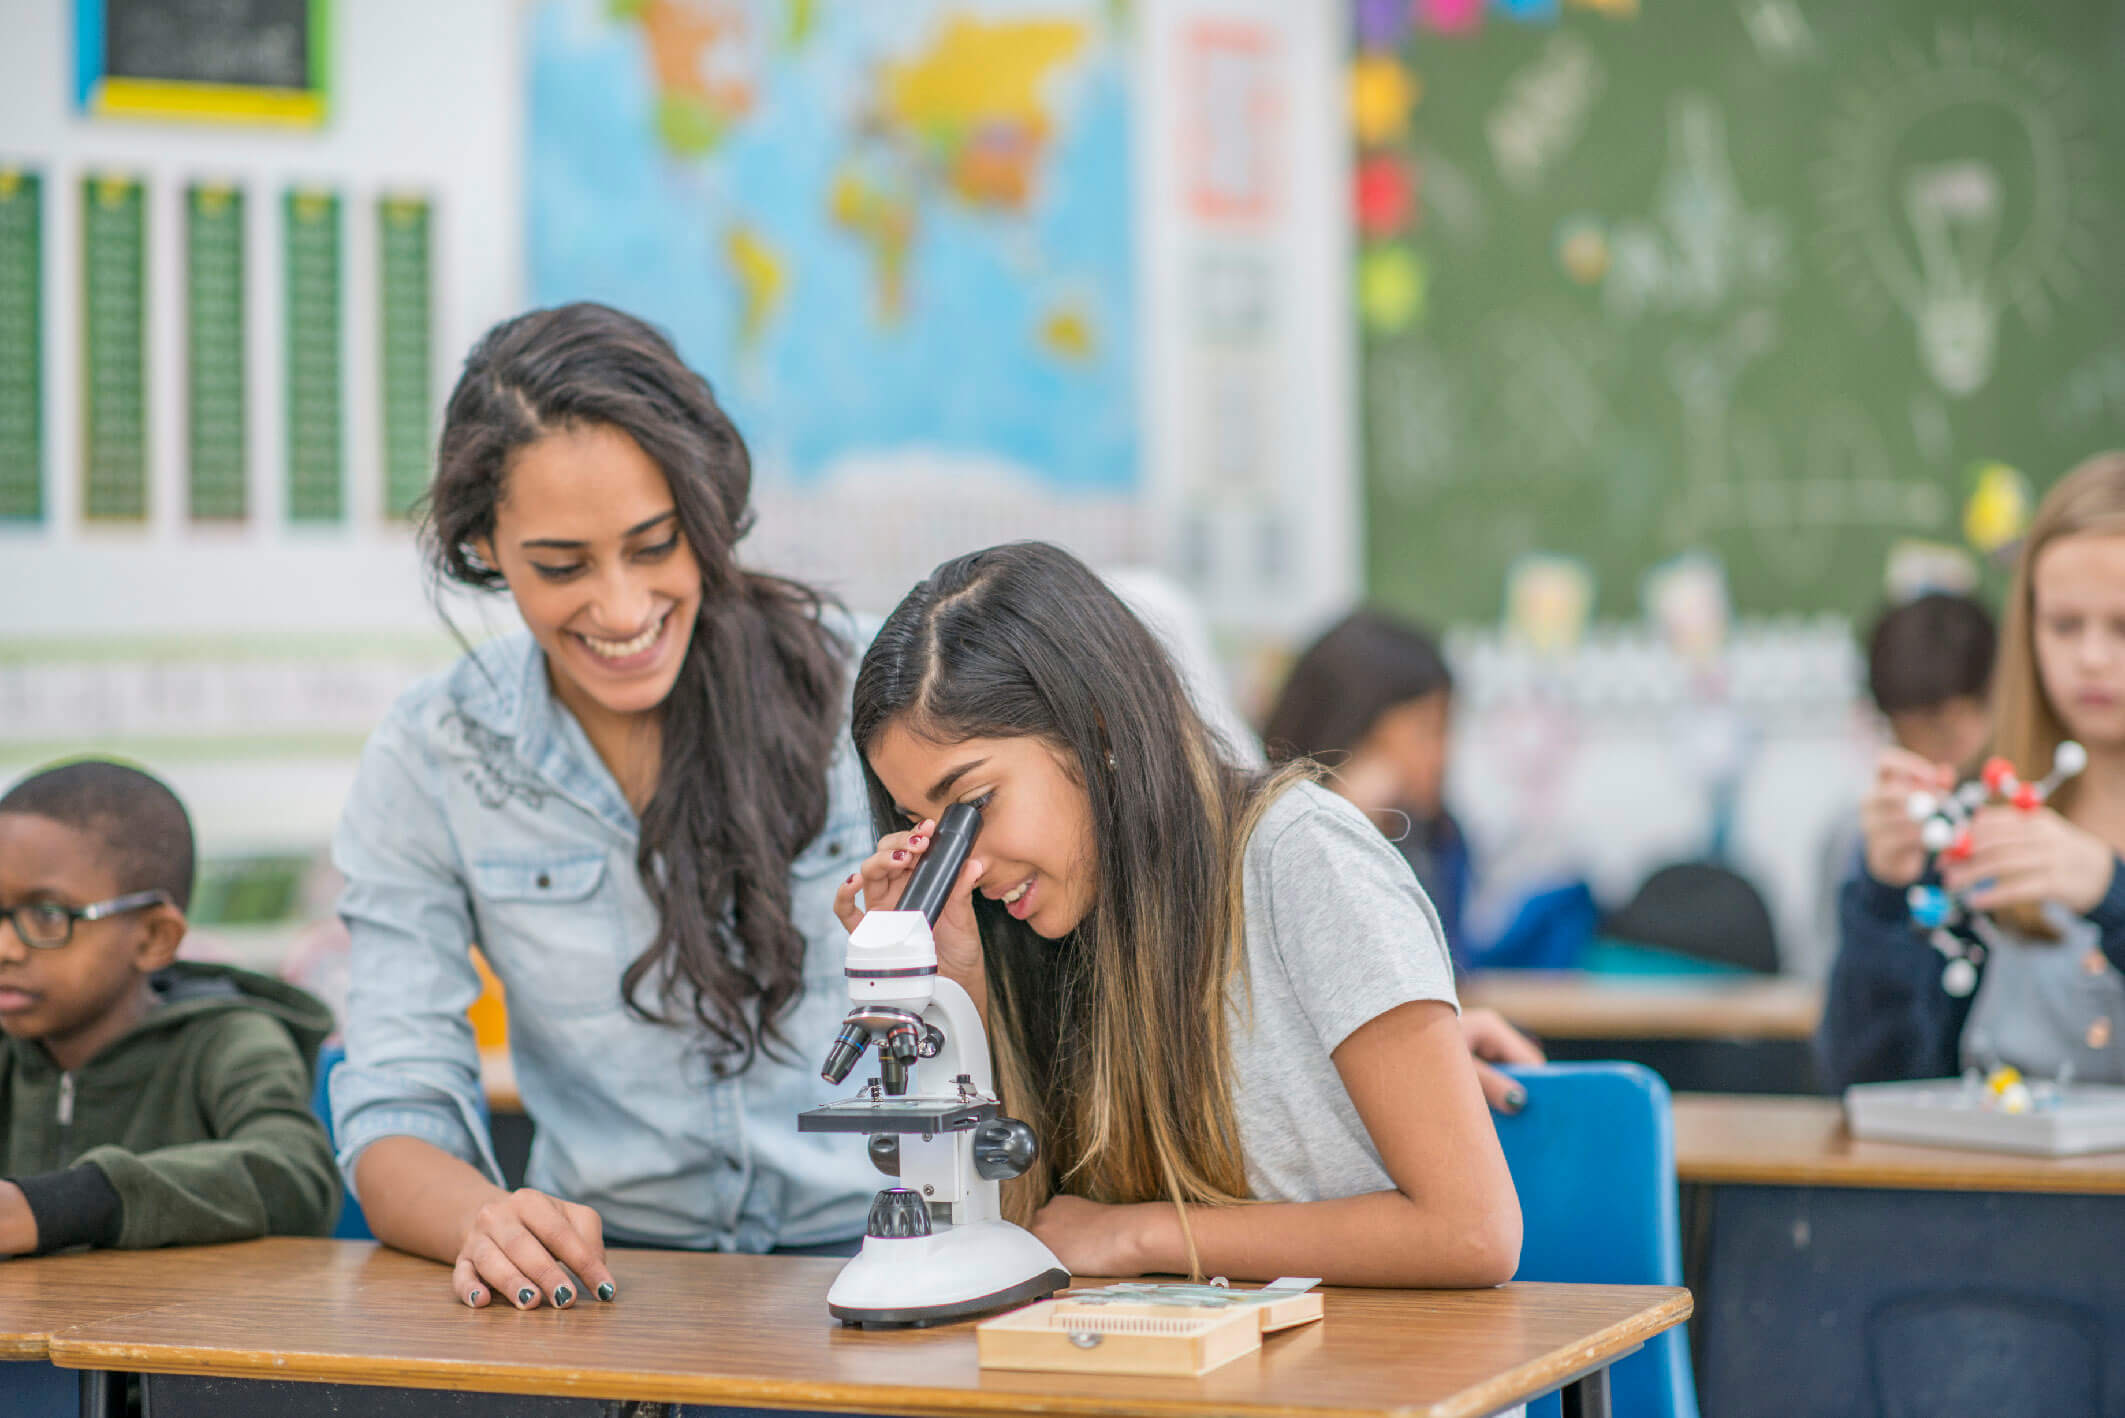 An elementary school girl and her teacher are working together on a science project. The girl is looking through a microscope.